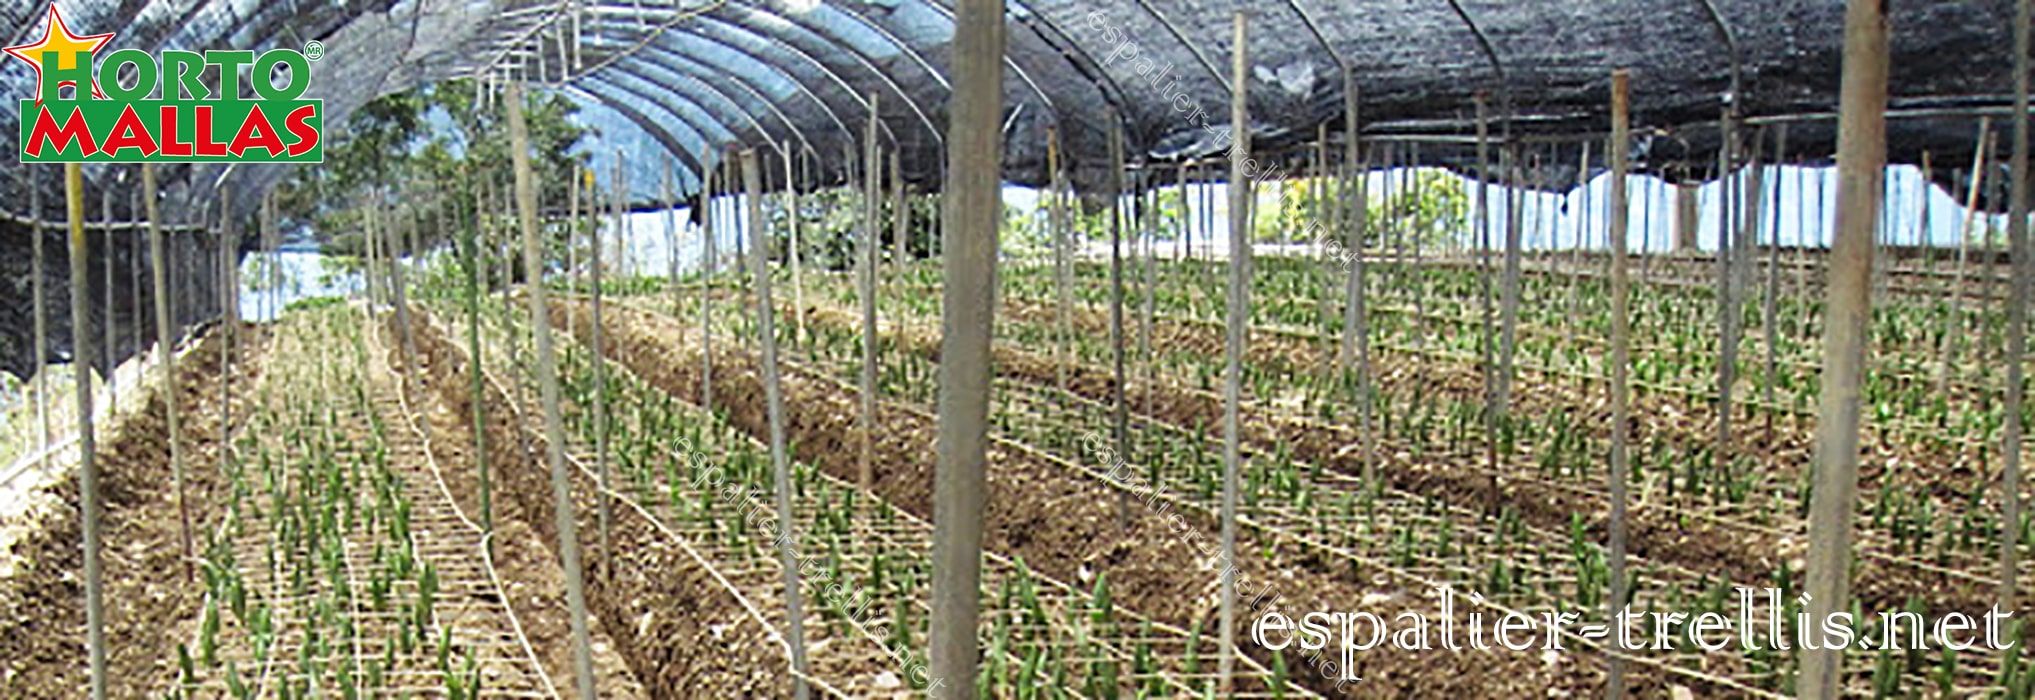 Trellis net for the good tutoring of the growth of the crops